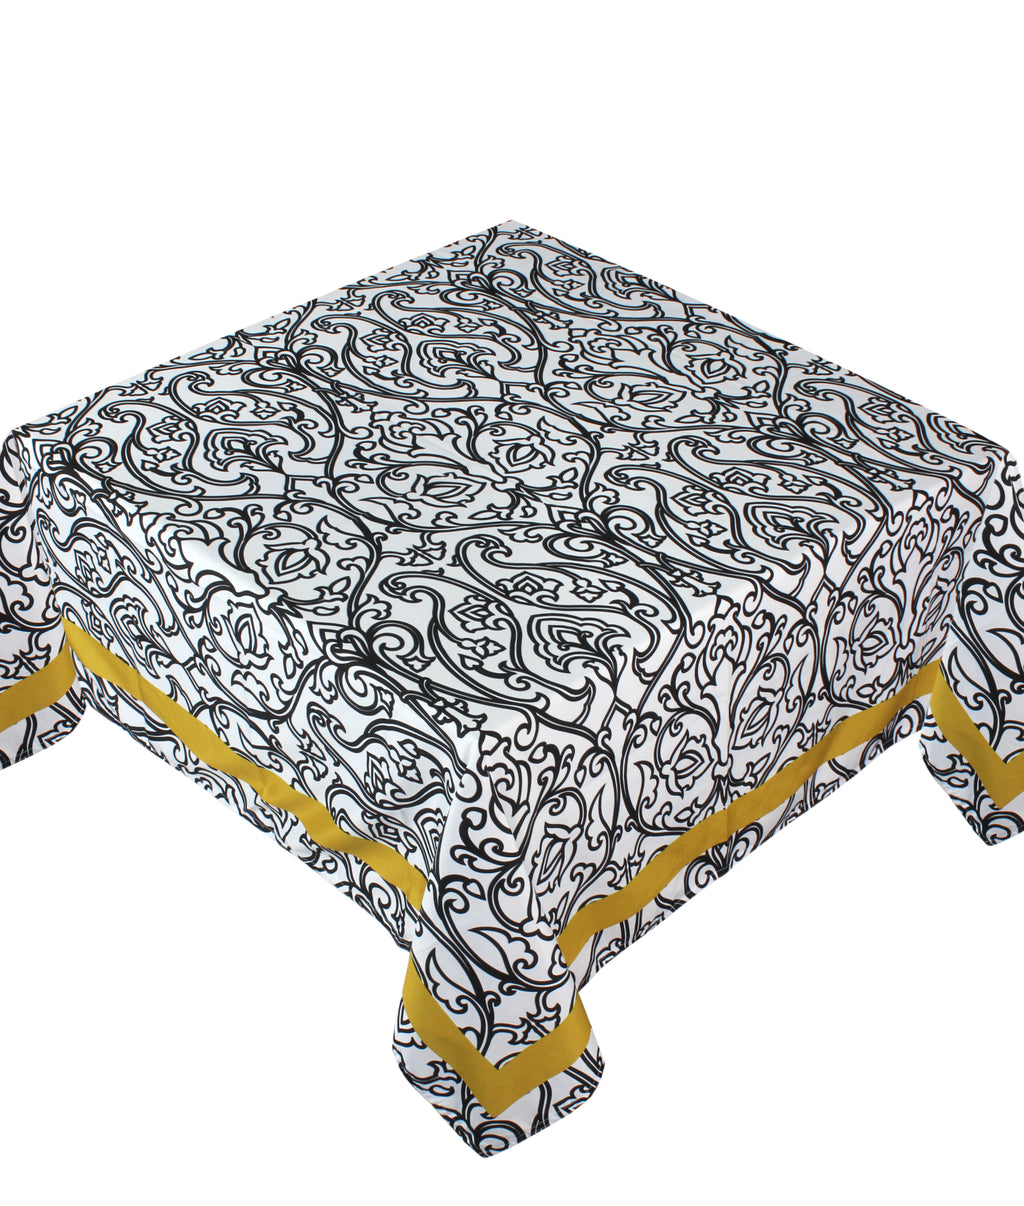 The classic black chic table cover